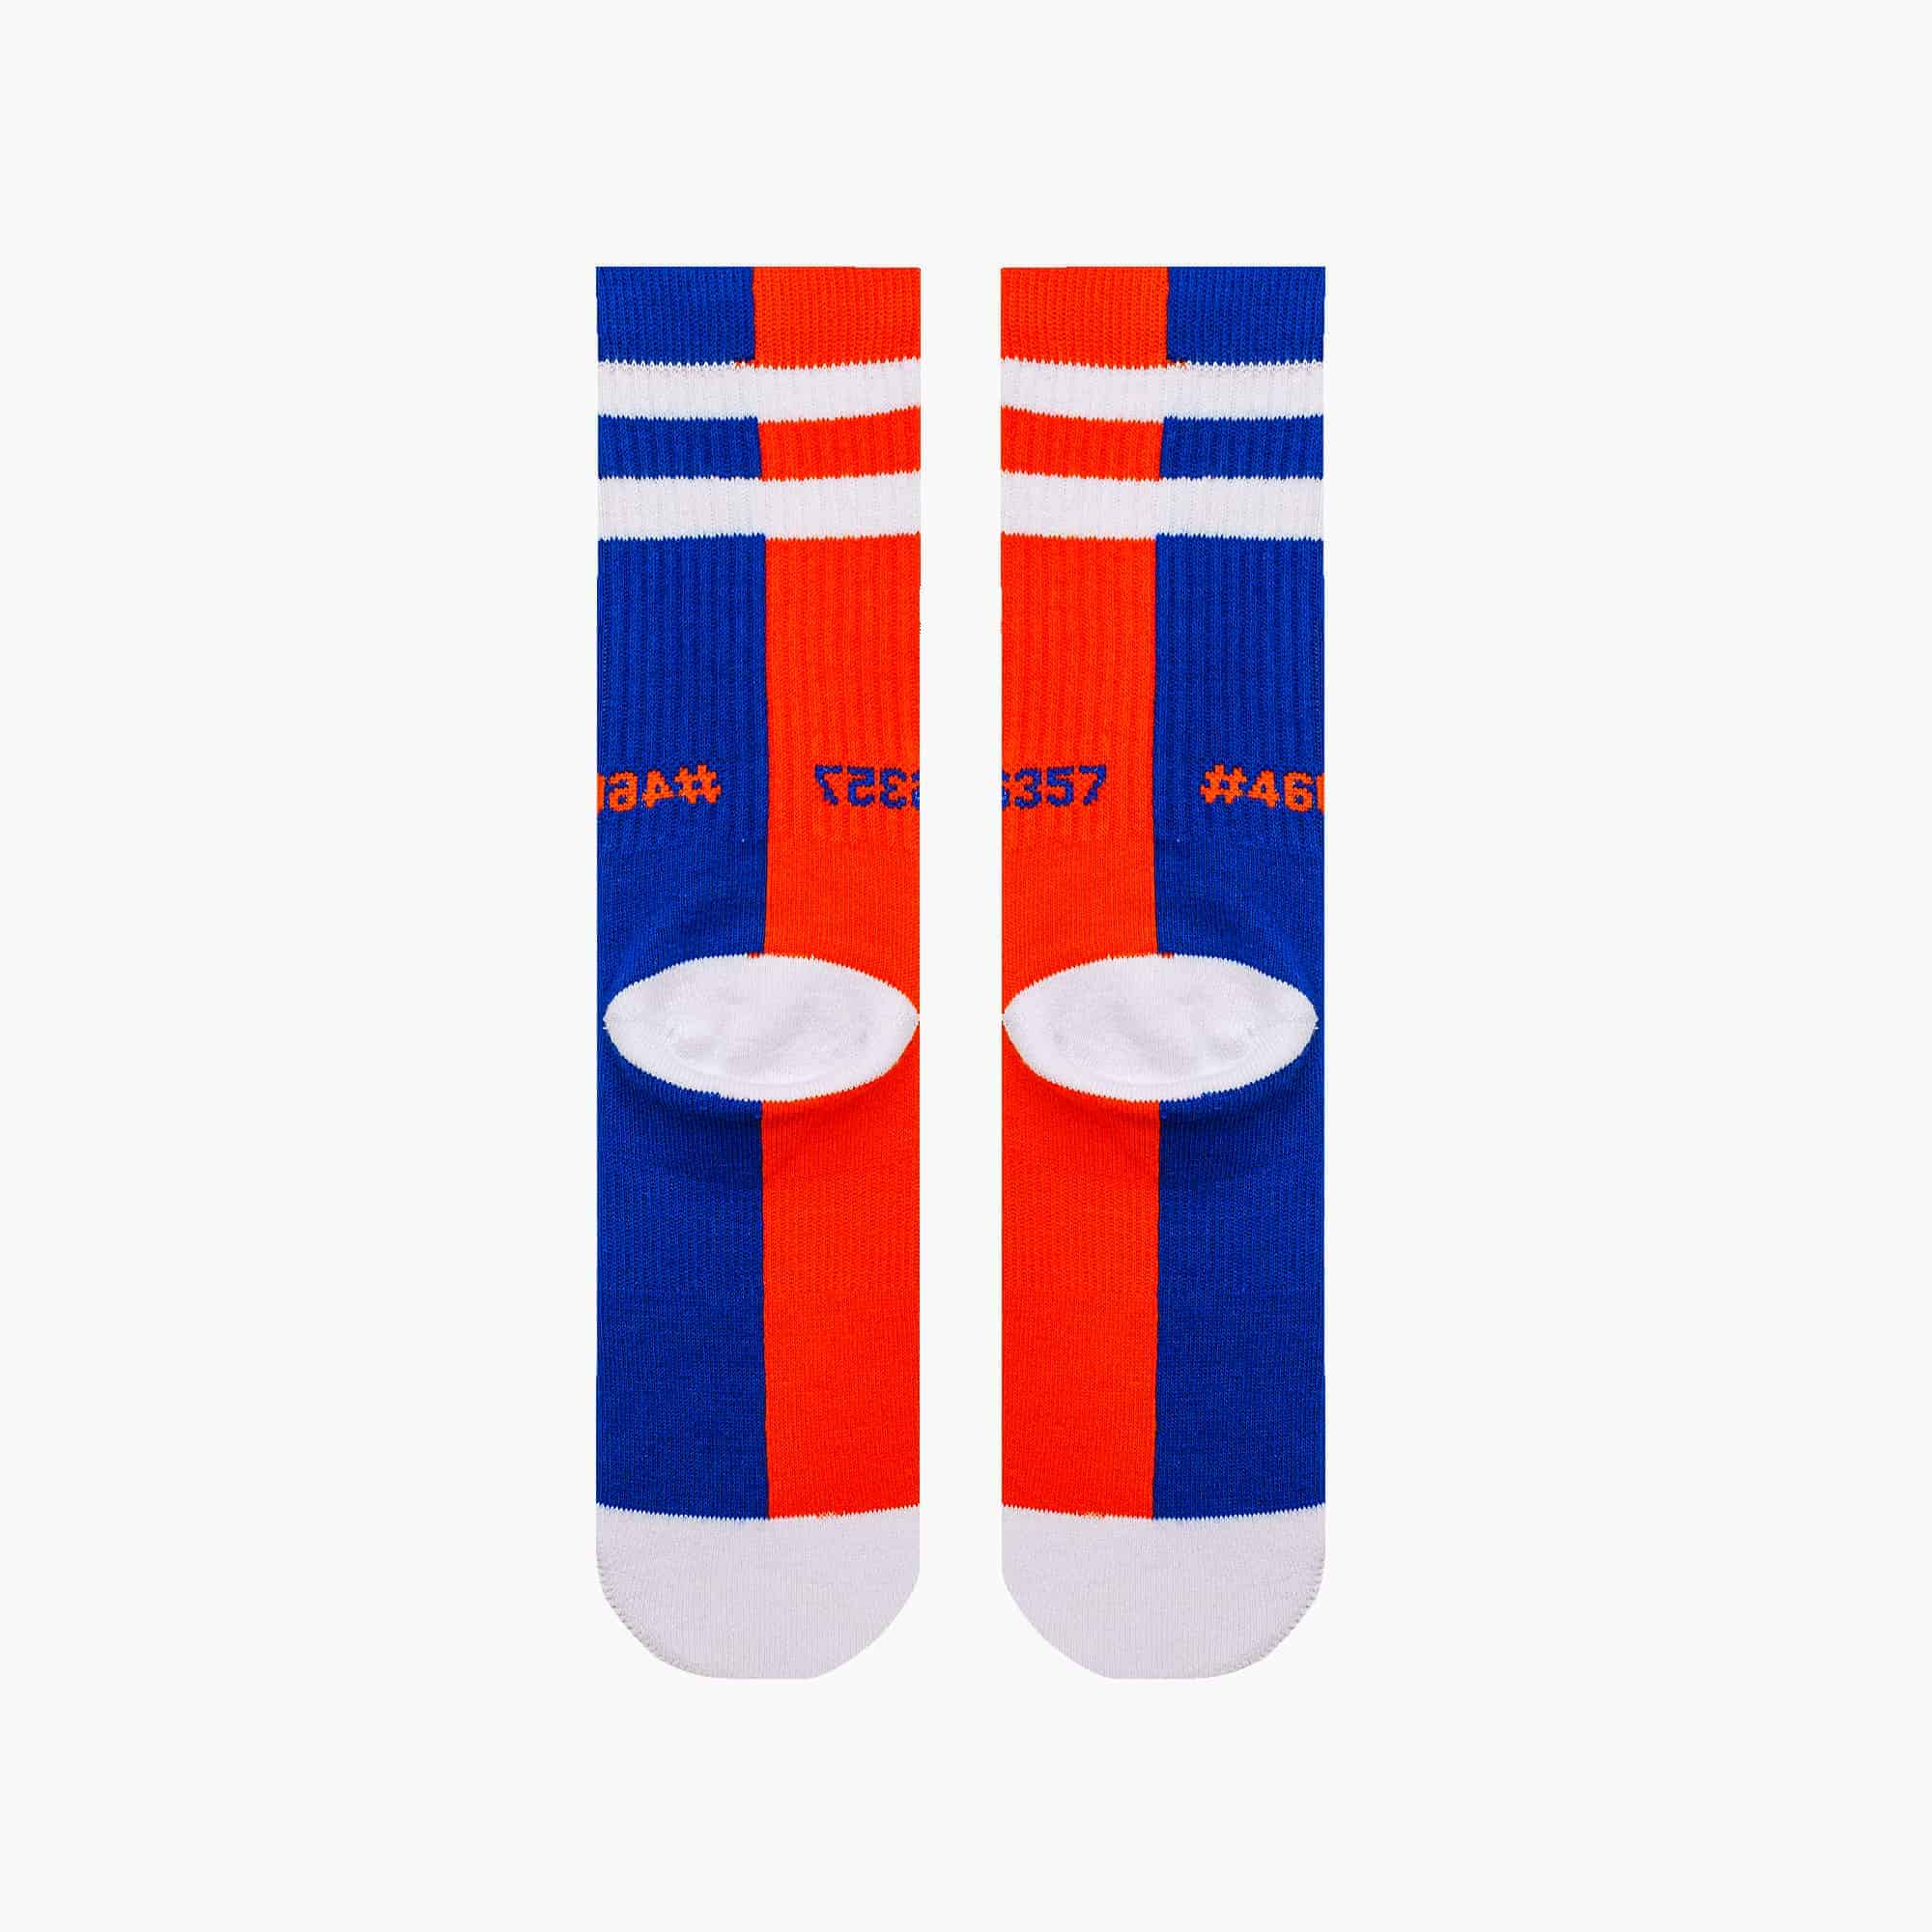 Limited Edition Art on Socks | Orange & Blue by Collectoe